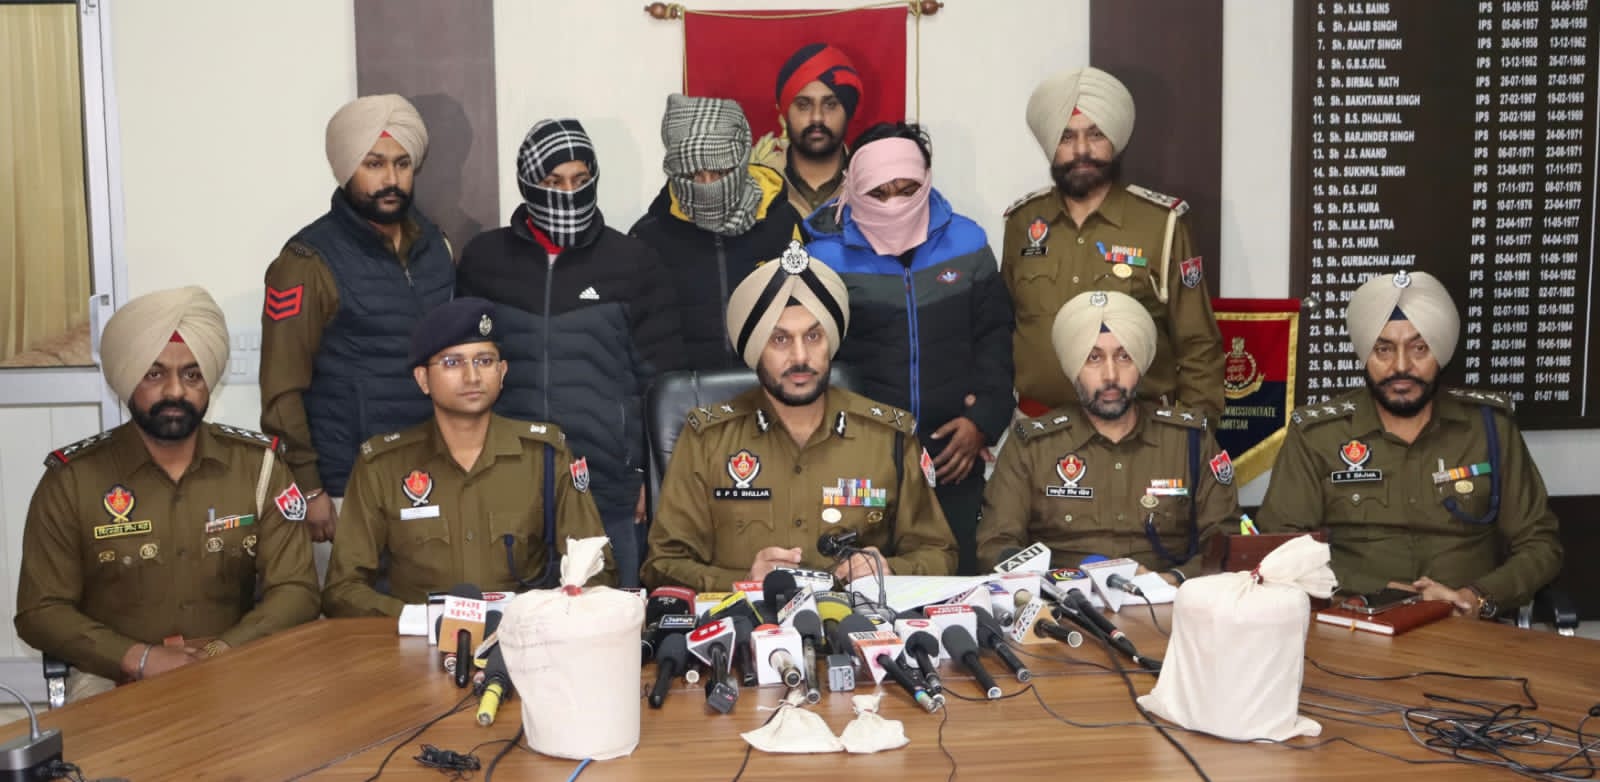 19KG heroin recovery: Punjab police arrest three more members of Mannu Mahawa cartel : 3.5 kg heroin recovered